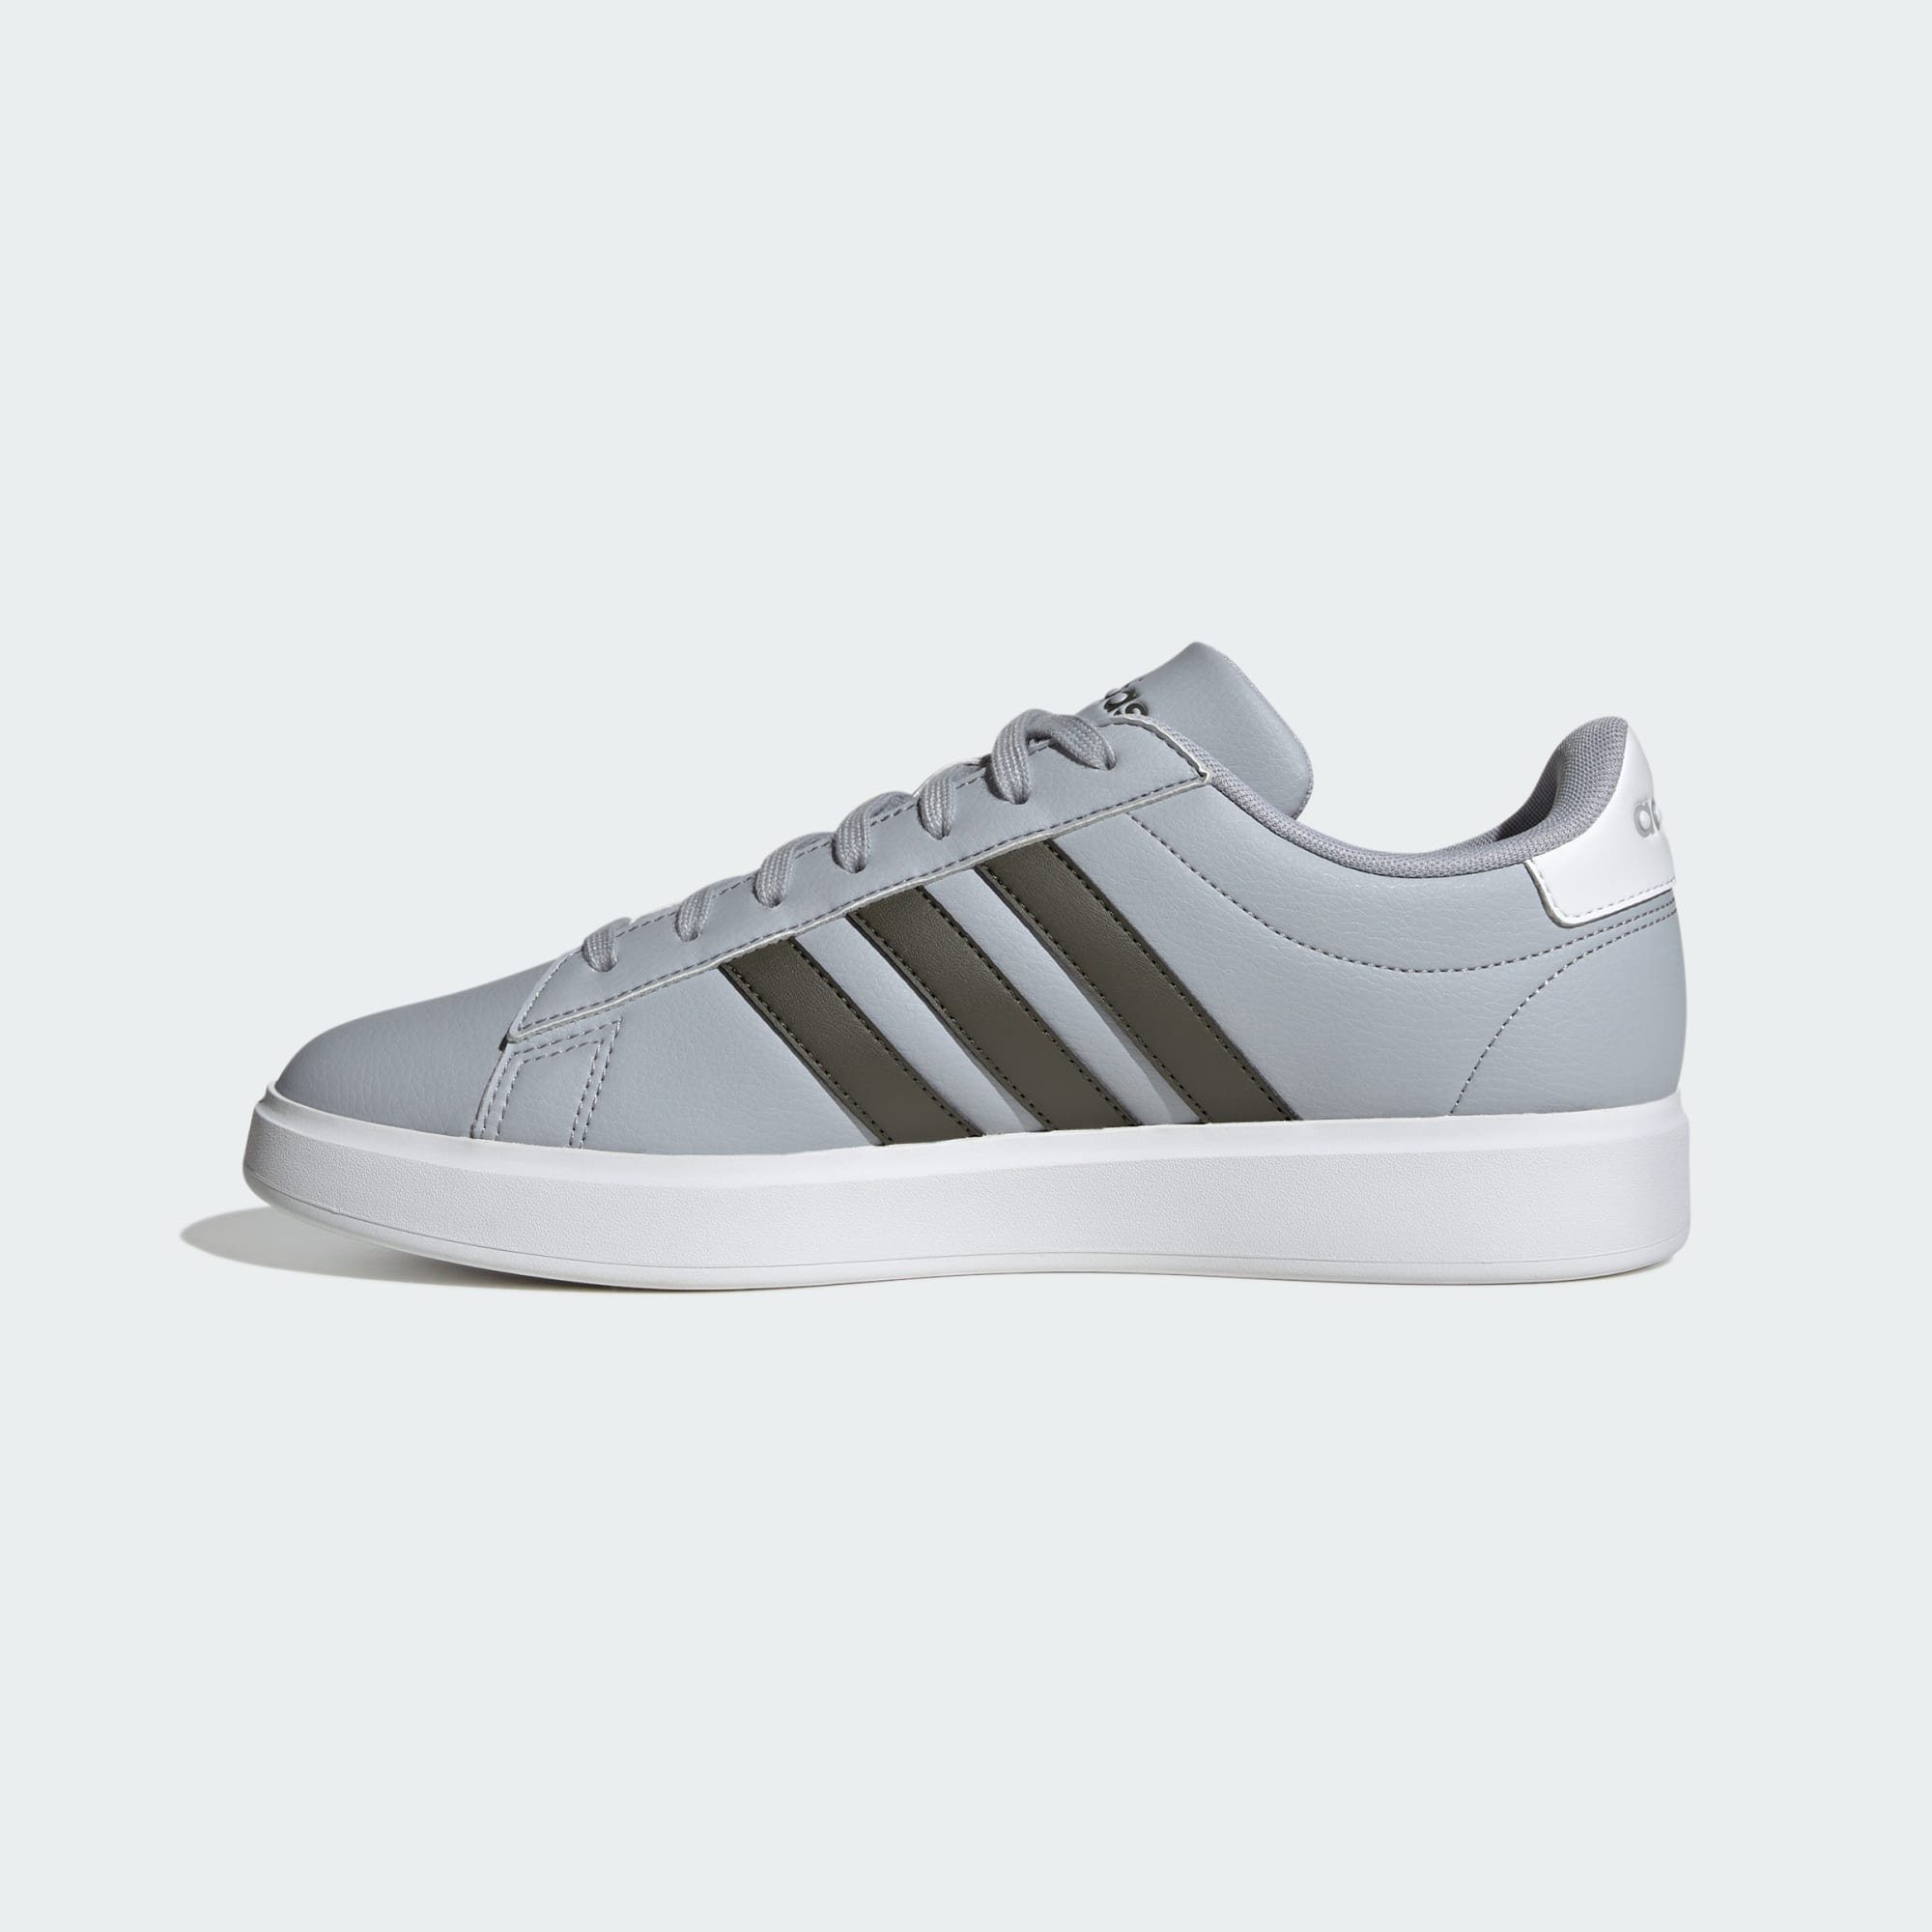 COMFORT White Sportswear Halo adidas COURT Olive / Sneaker GRAND Silver / Shadow Cloud CLOUDFOAM SCHUH